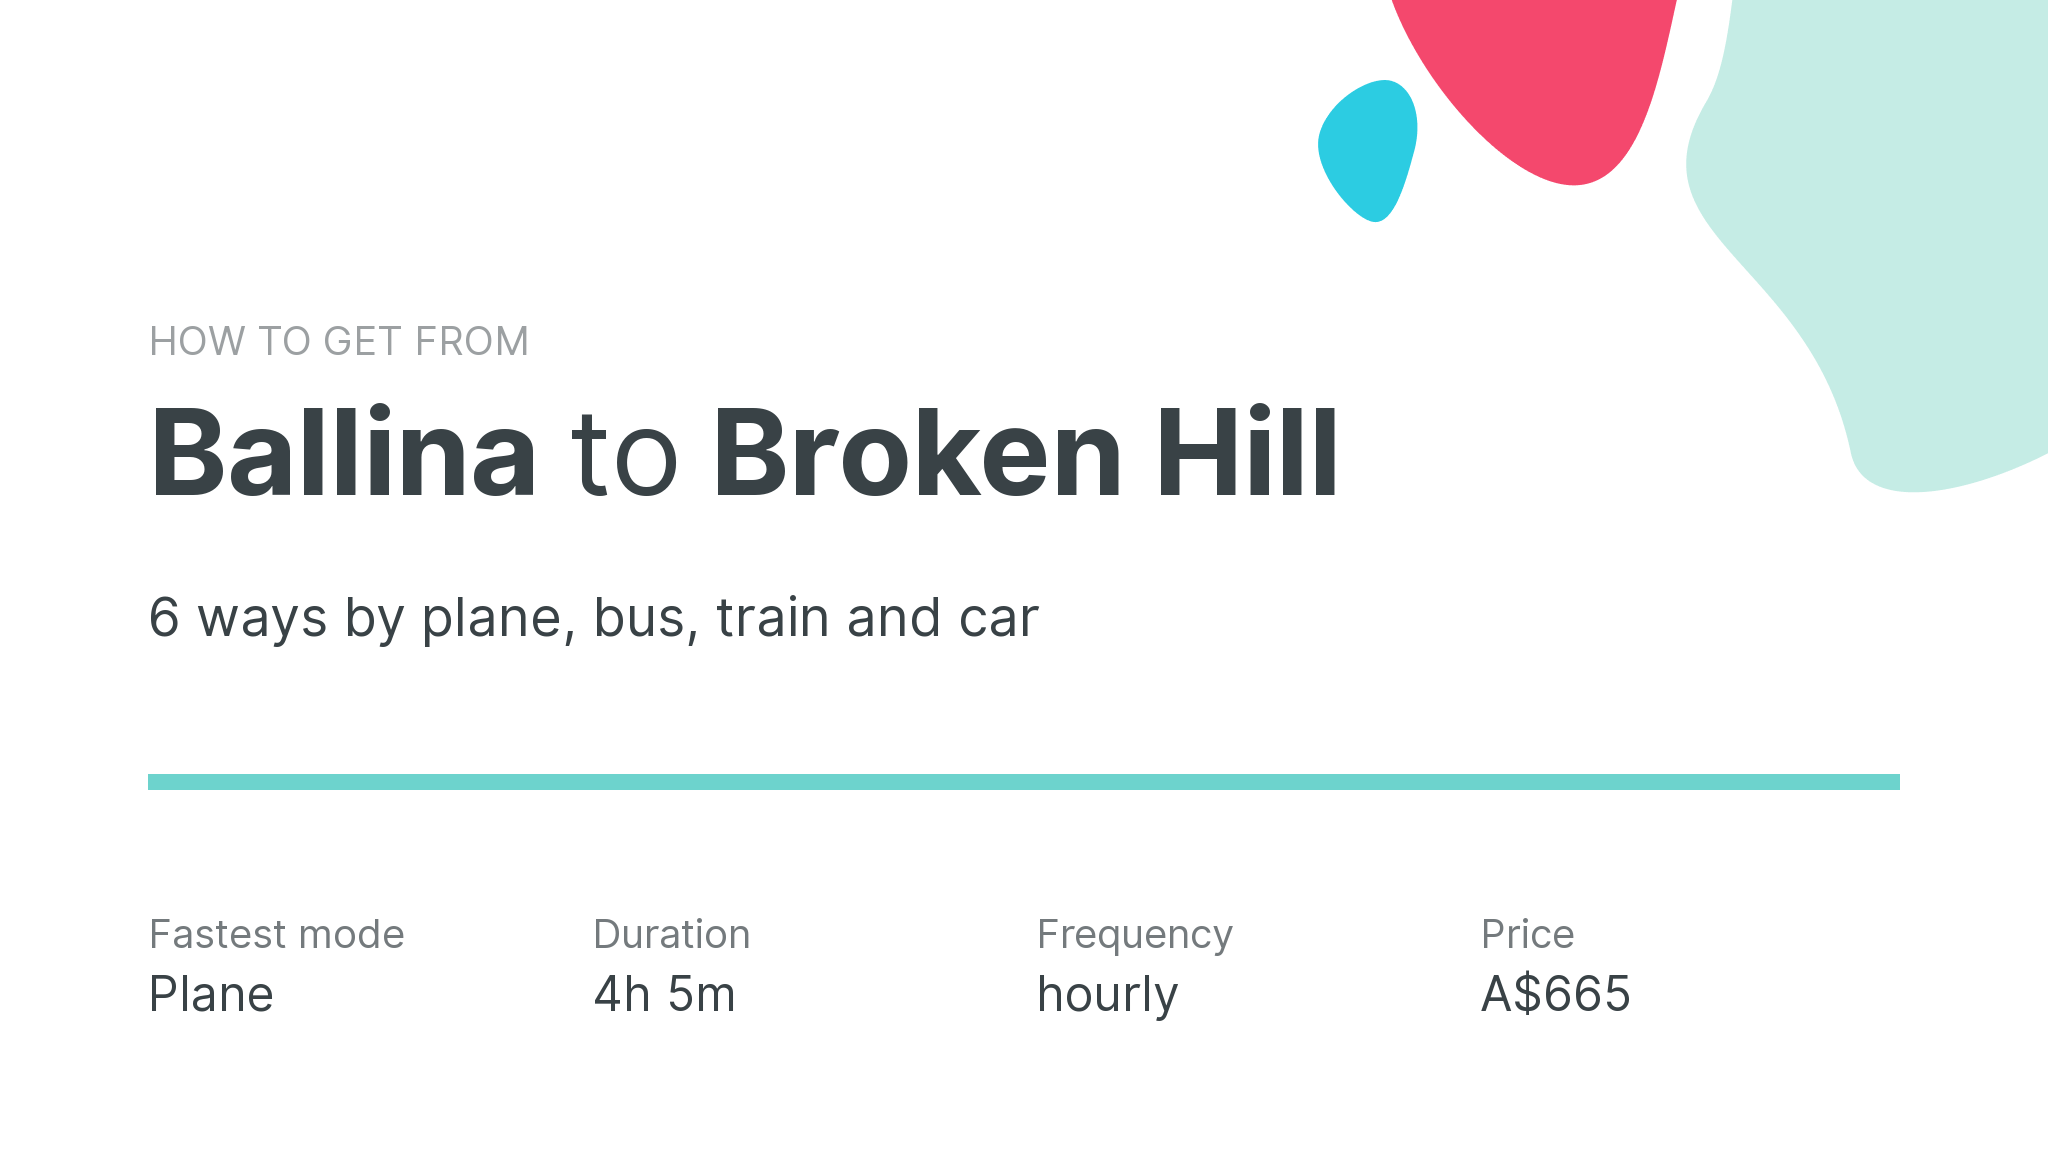 How do I get from Ballina to Broken Hill